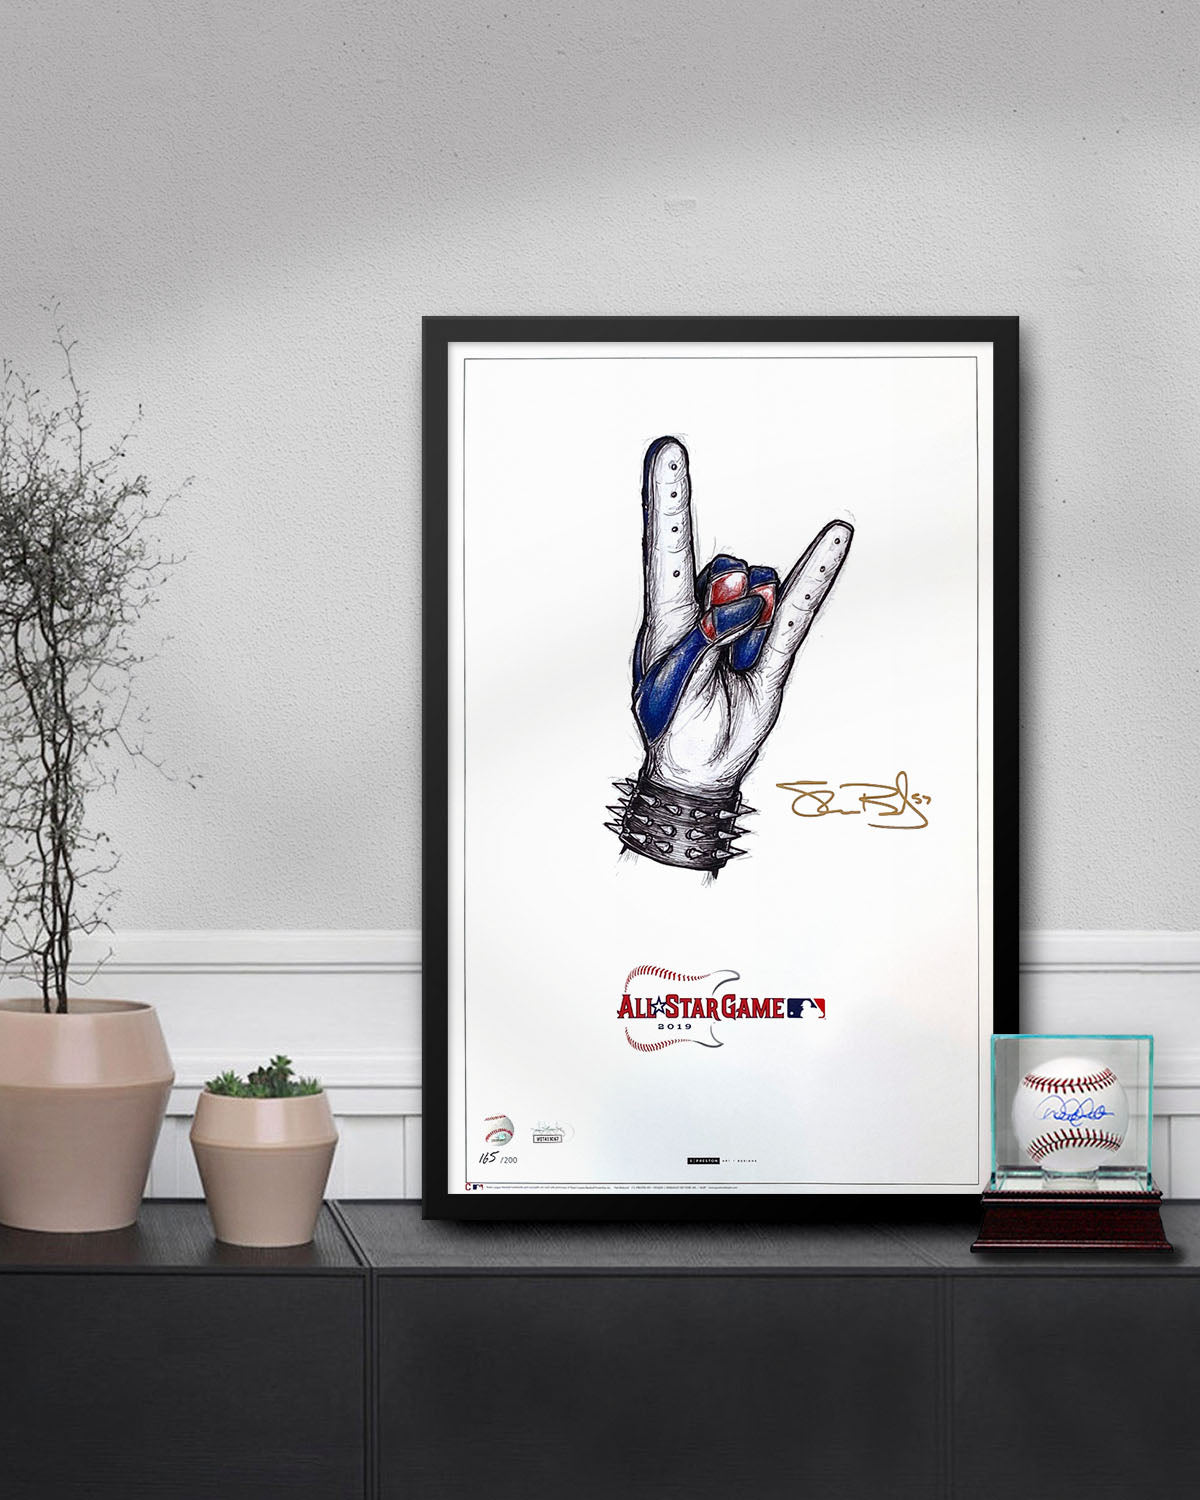 All-Star Game 2019 Sketch Print - Shane Bieber Signed - Poster Print - Authenticated